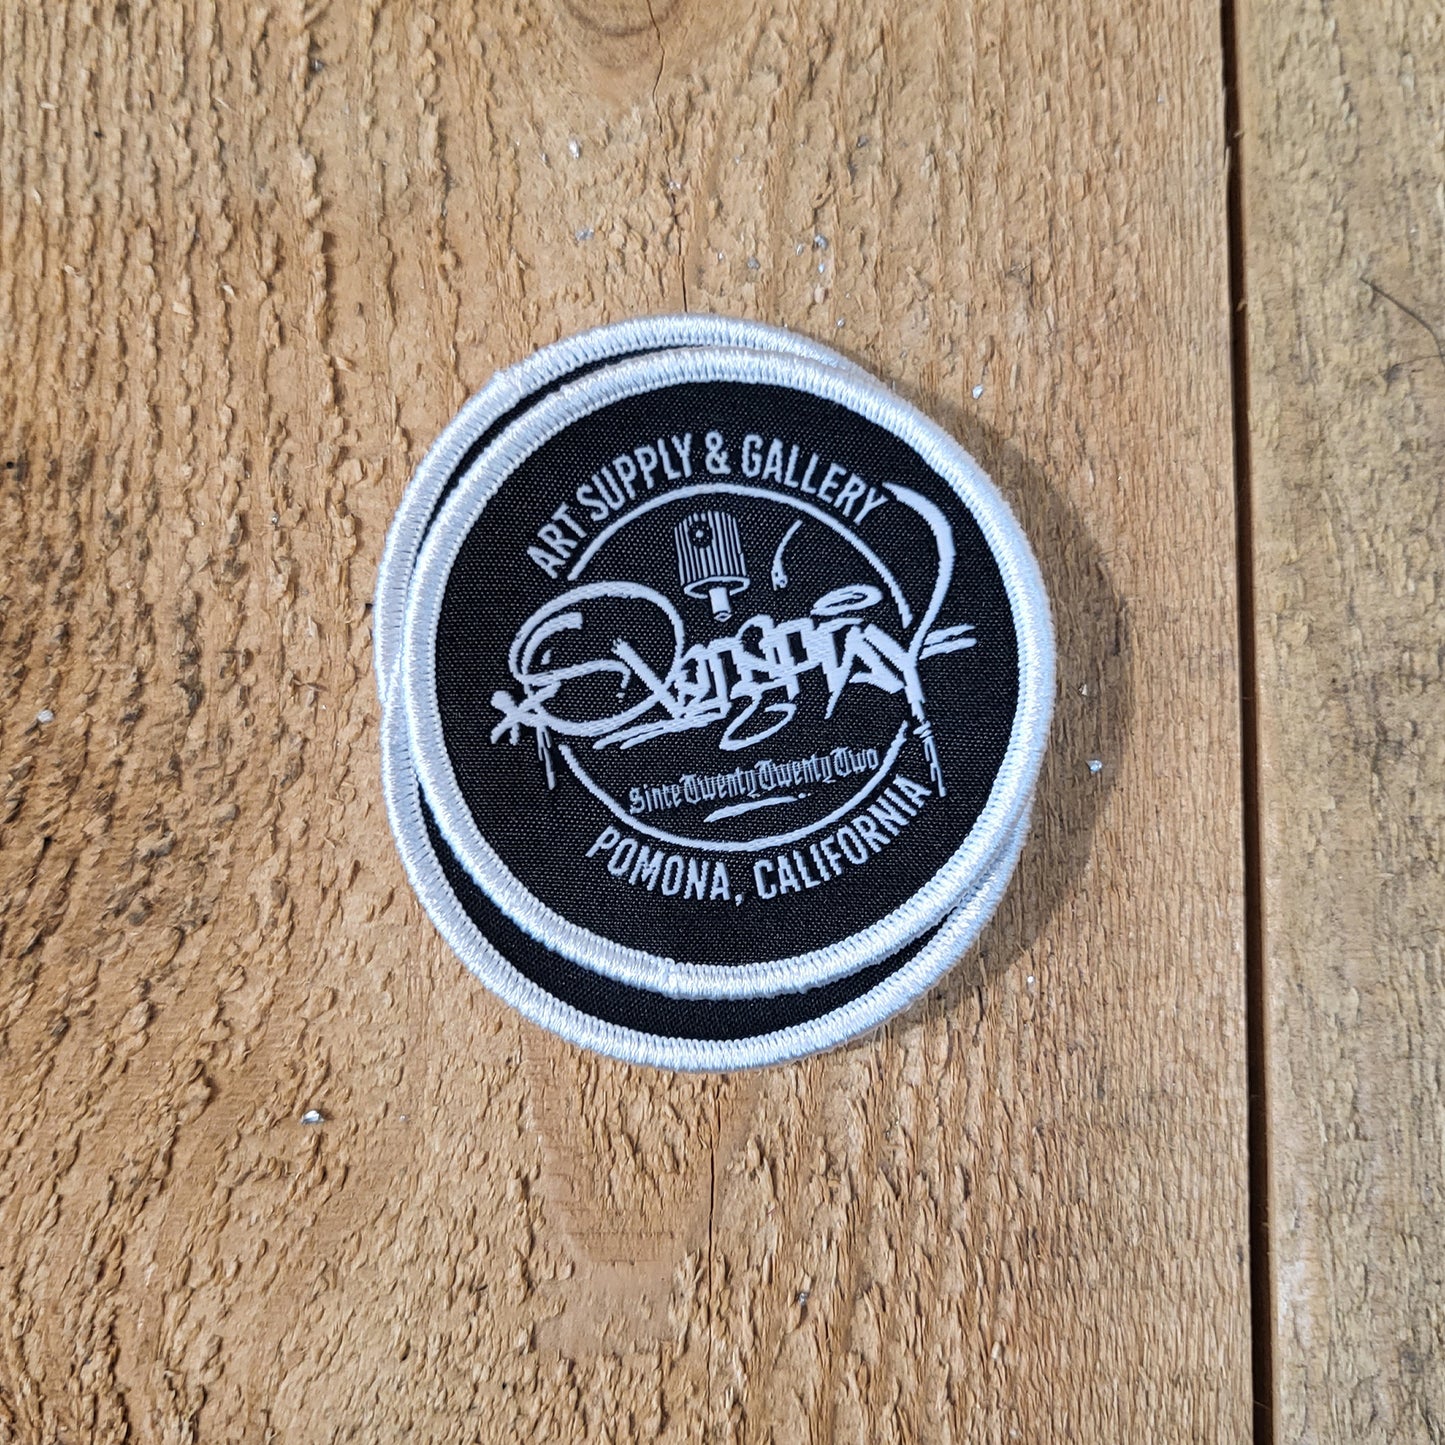 round black overspray tag patch with a silver edge